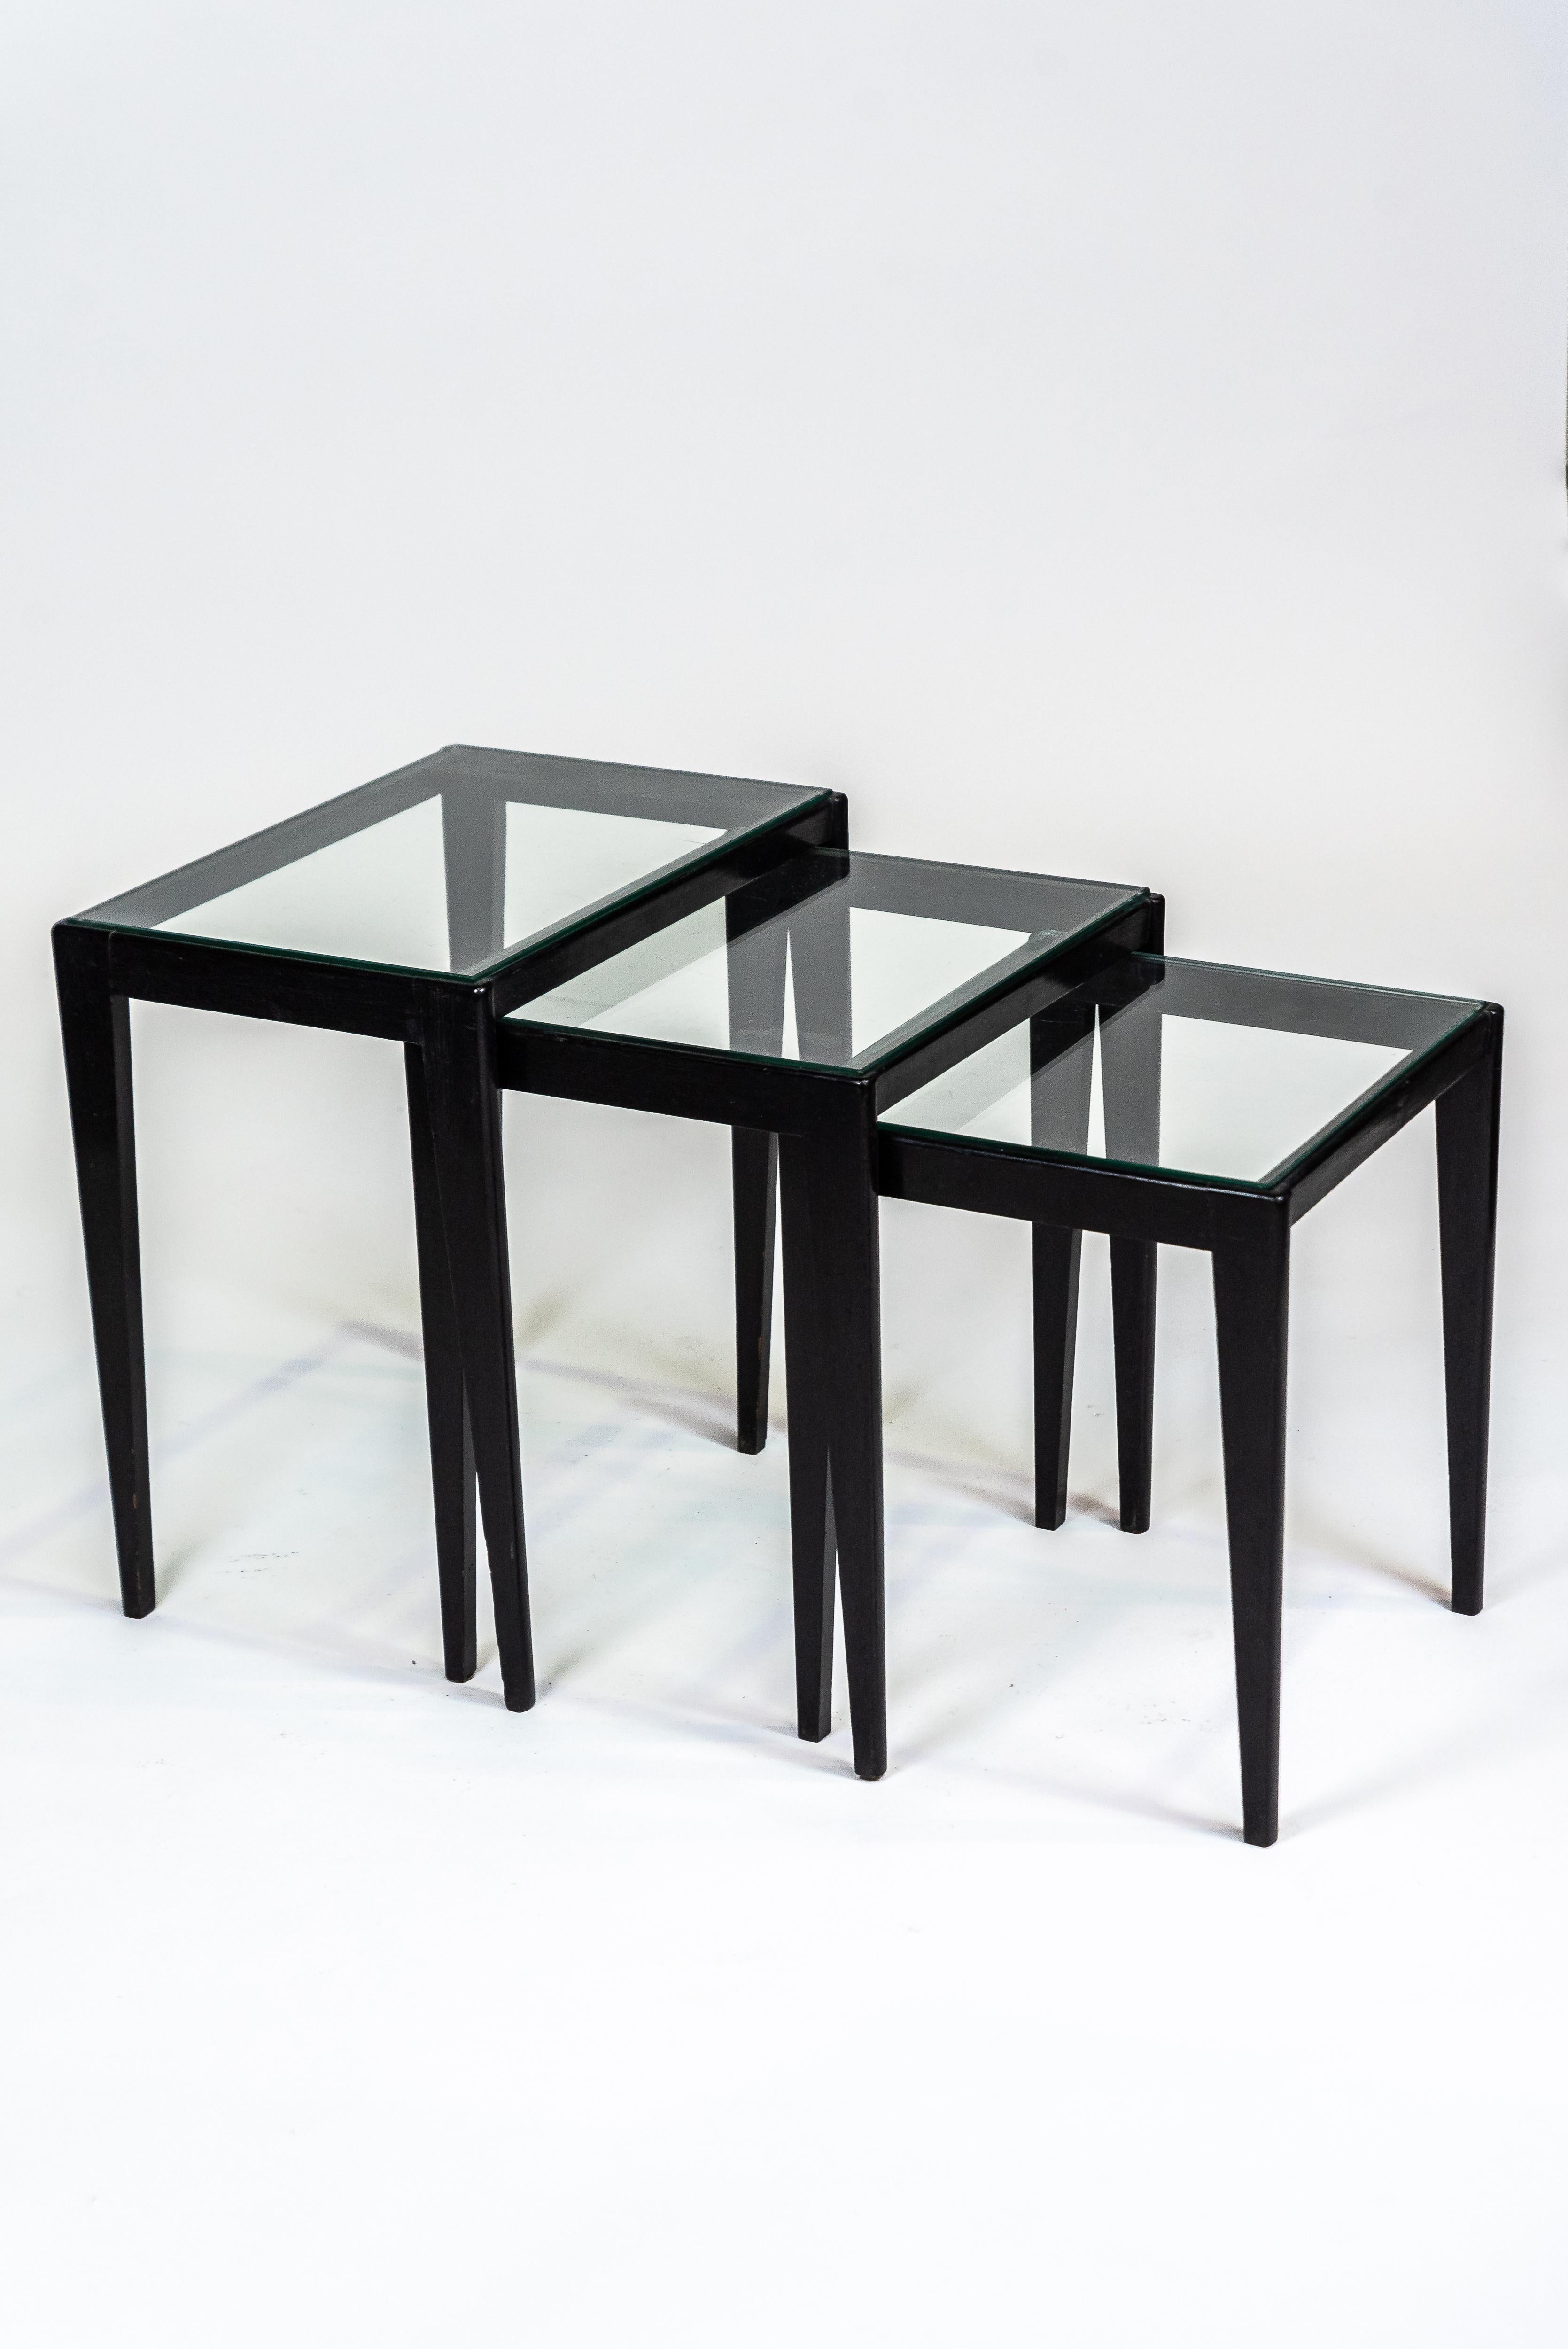 Glass Giuseppe Scapinelli, Nesting Tables, 1960 For Sale